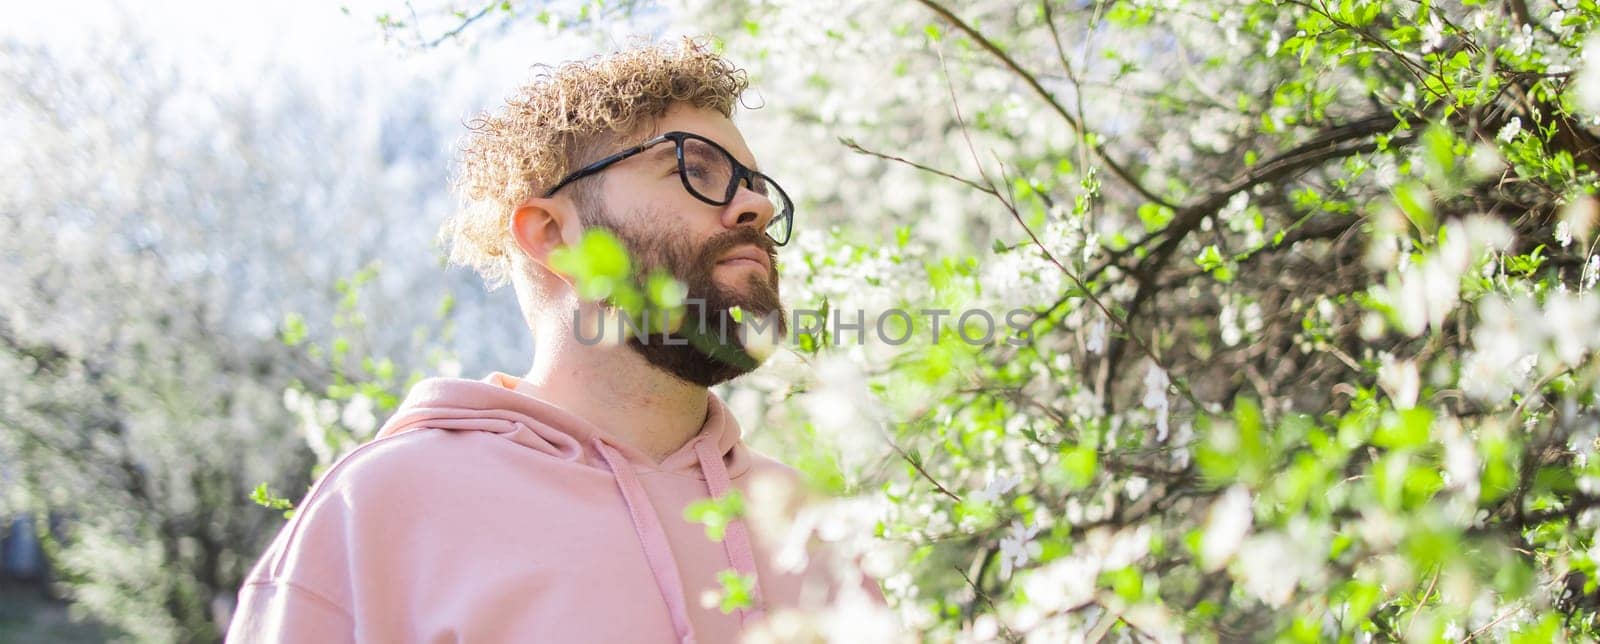 Male bearded guy standing under branches with flowers of blooming almond or cherry tree in spring garden. Spring blossom. Copy space